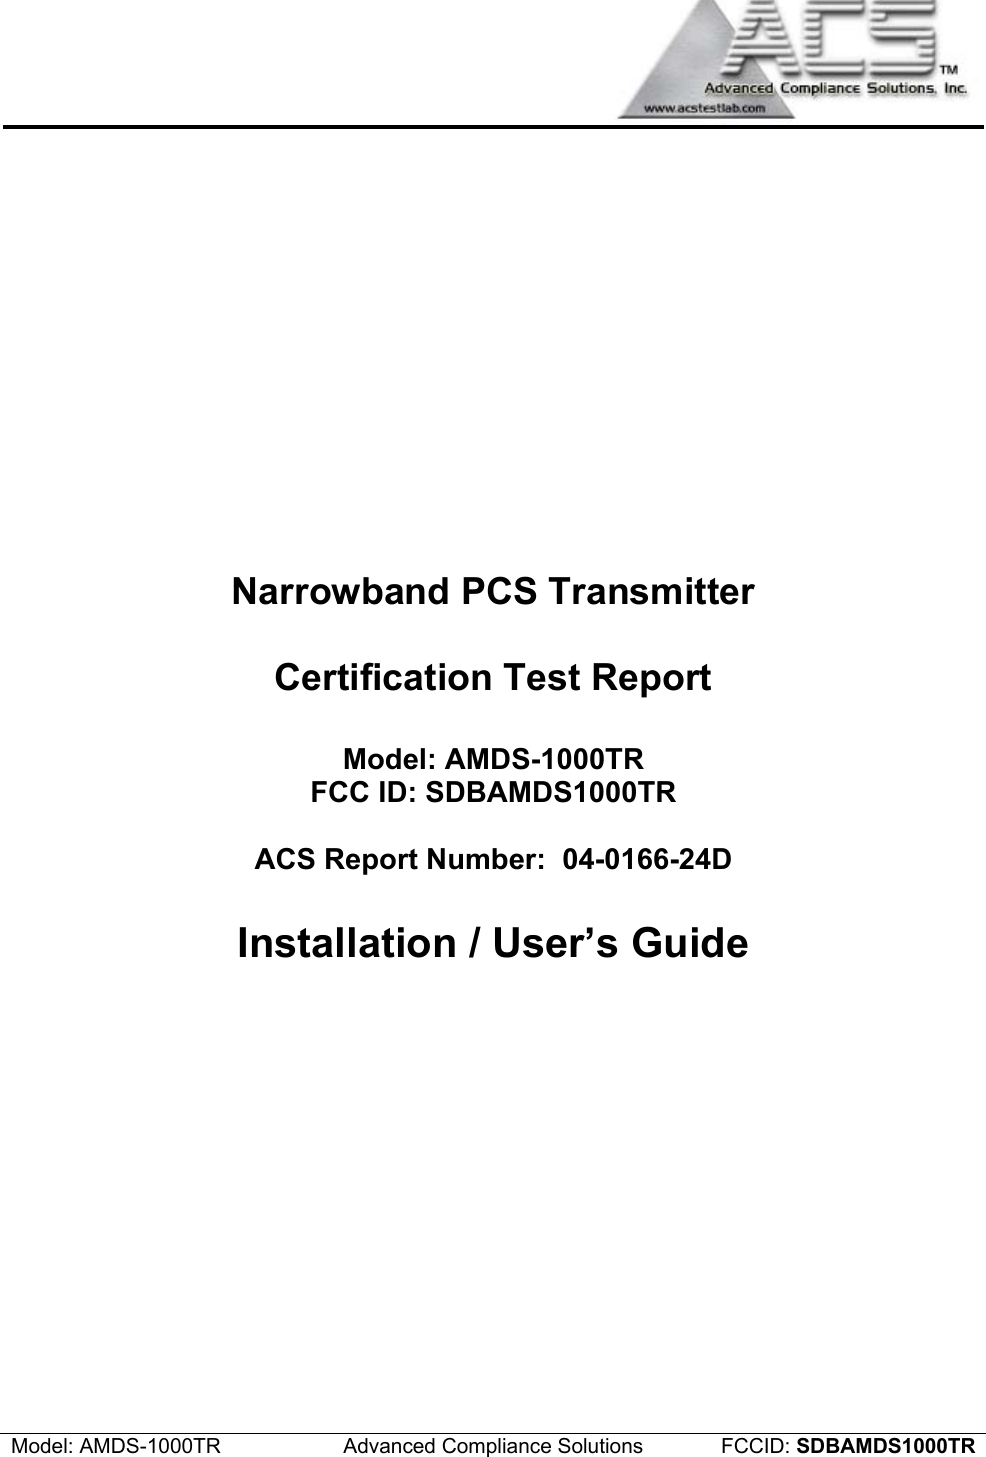  Model: AMDS-1000TR  Advanced Compliance Solutions  FCCID: SDBAMDS1000TR Narrowband PCS Transmitter  Certification Test Report  Model: AMDS-1000TR FCC ID: SDBAMDS1000TR  ACS Report Number:  04-0166-24D  Installation / User’s Guide 